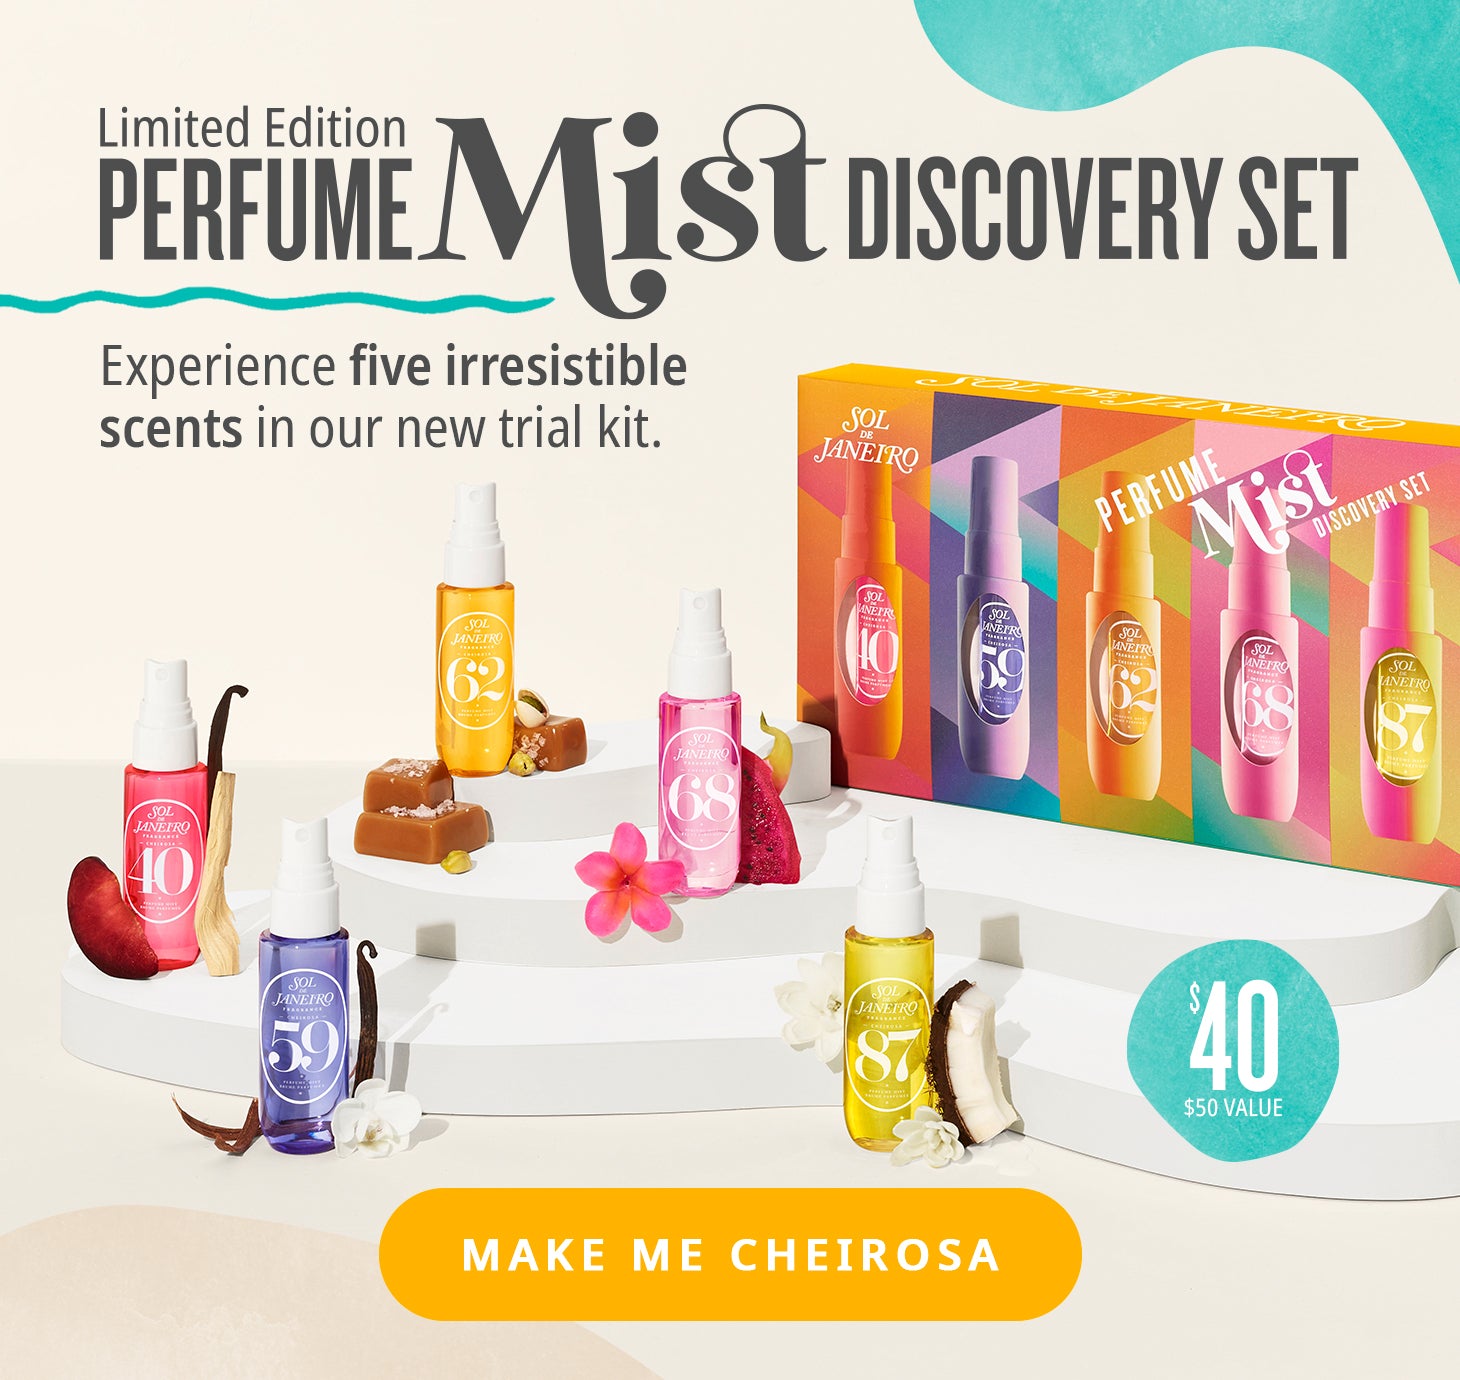 Limited edition perfume mist discovery set. Experience five irresistible scents in our new trial kit. Make me cheirosa!